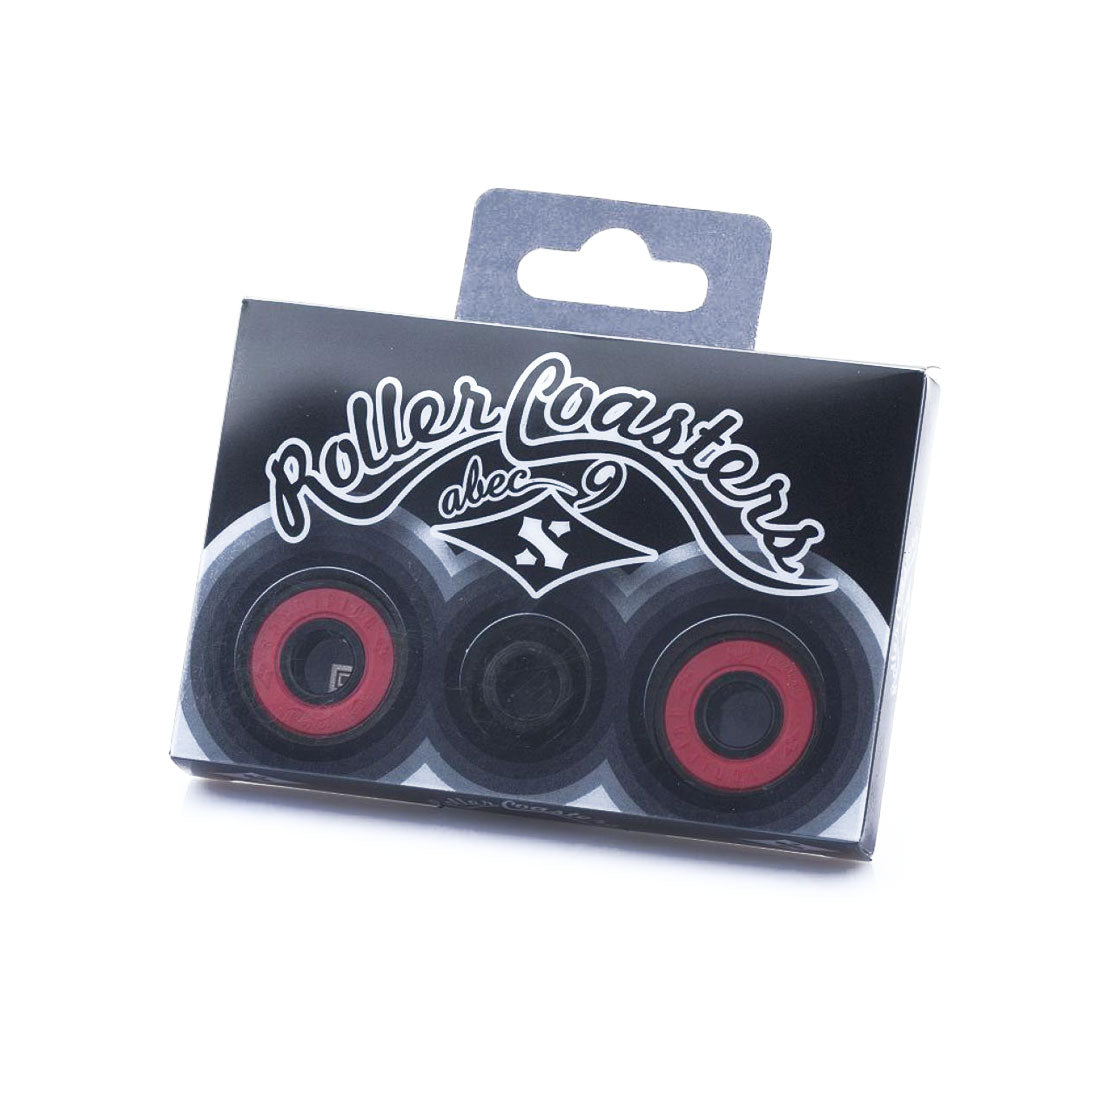 Sacrifice Roller Coasters Abec 9 Bearings - Red/Black Scooter Hardware and Parts